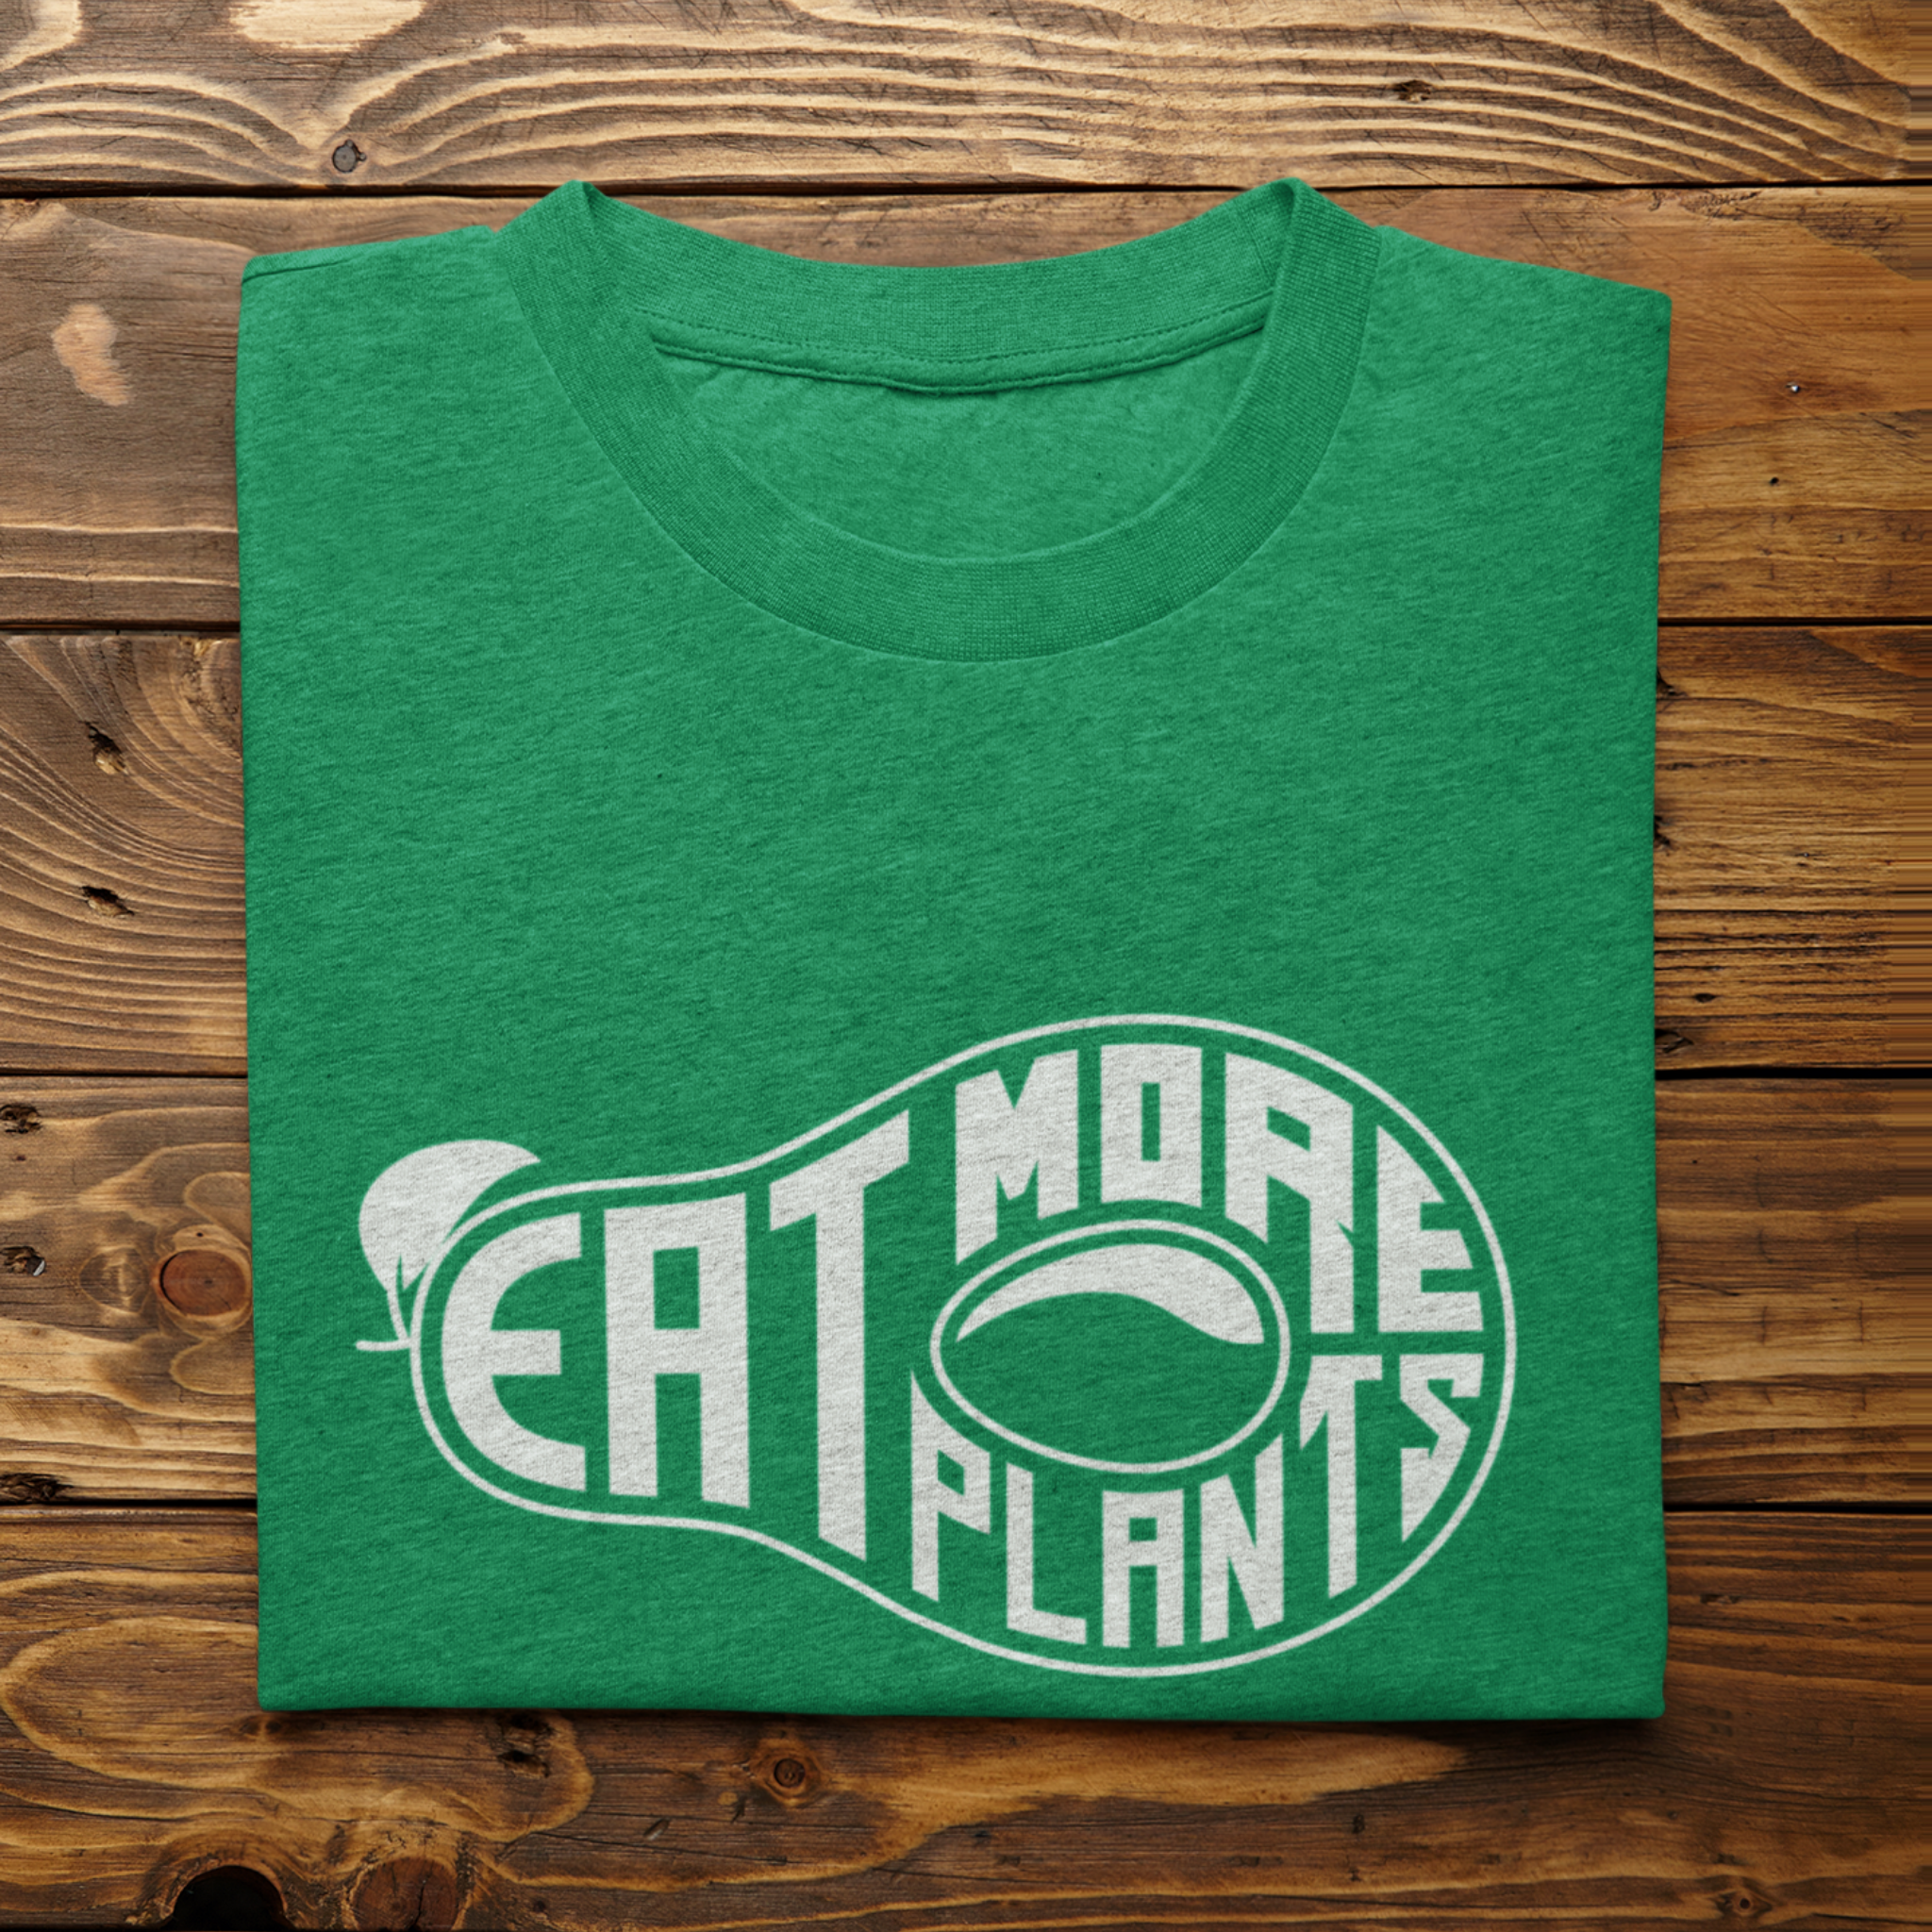 Vegan t shirt saying eat more plants in the shape of an avocado on heather kelly (green) color folded premium tee on wood plank surface